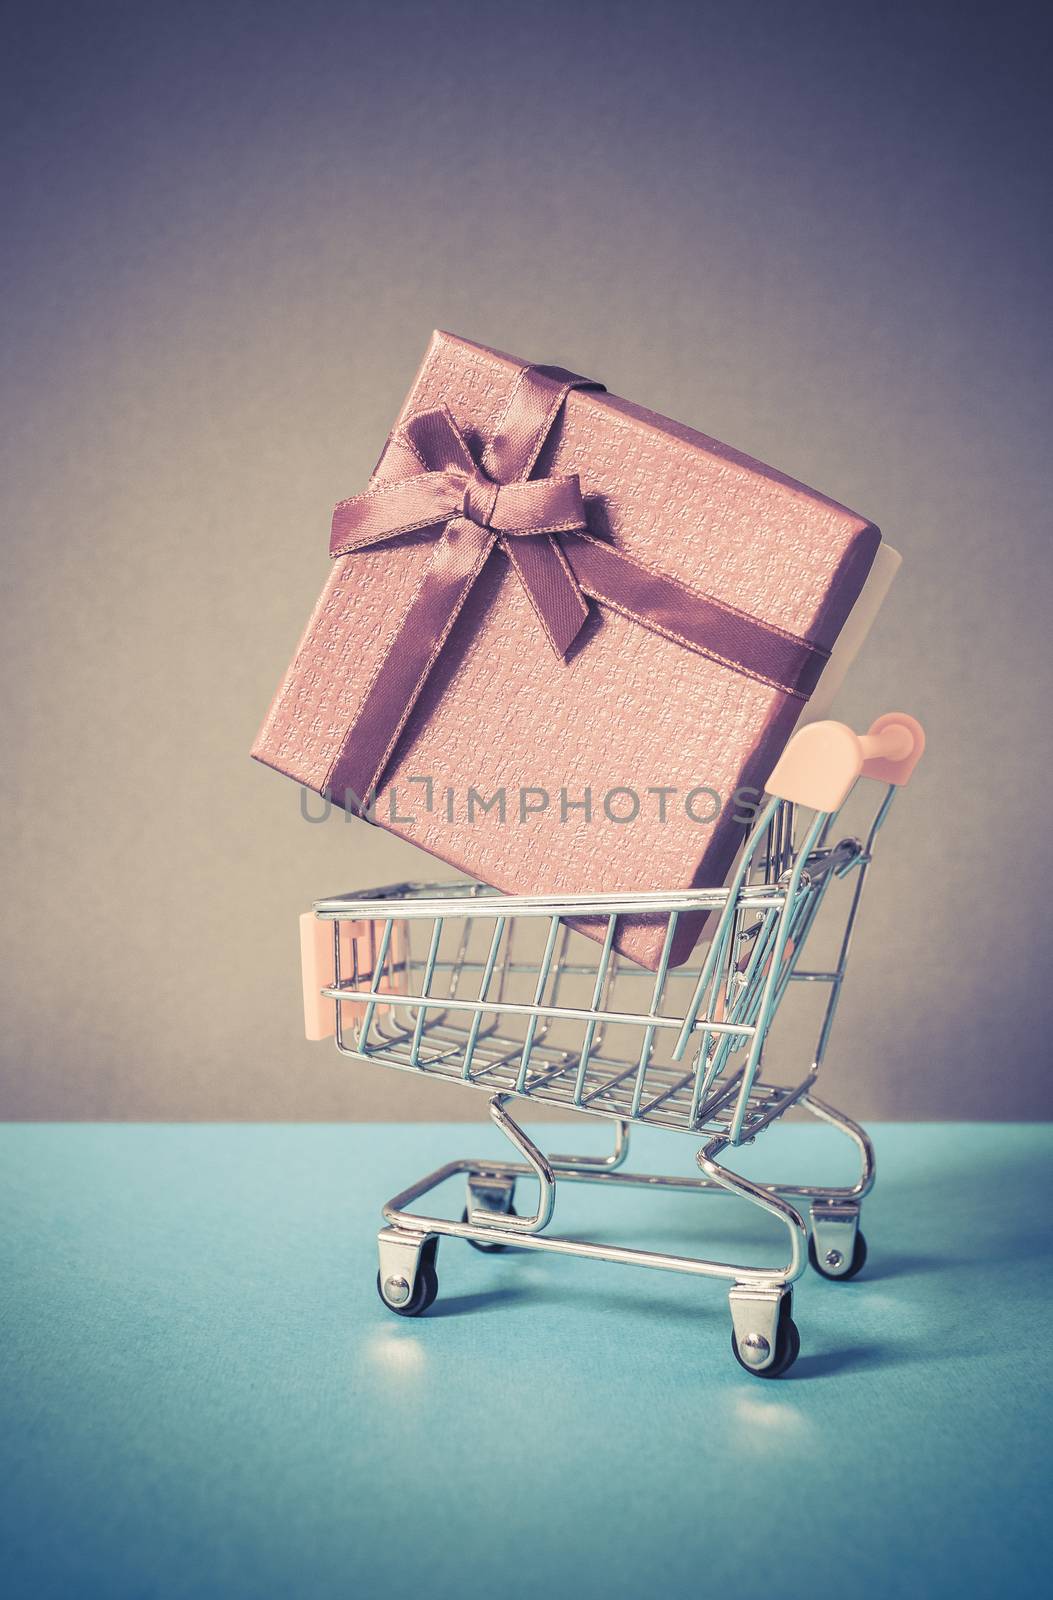 huge red gift box in shopping cart - online shopping by melis